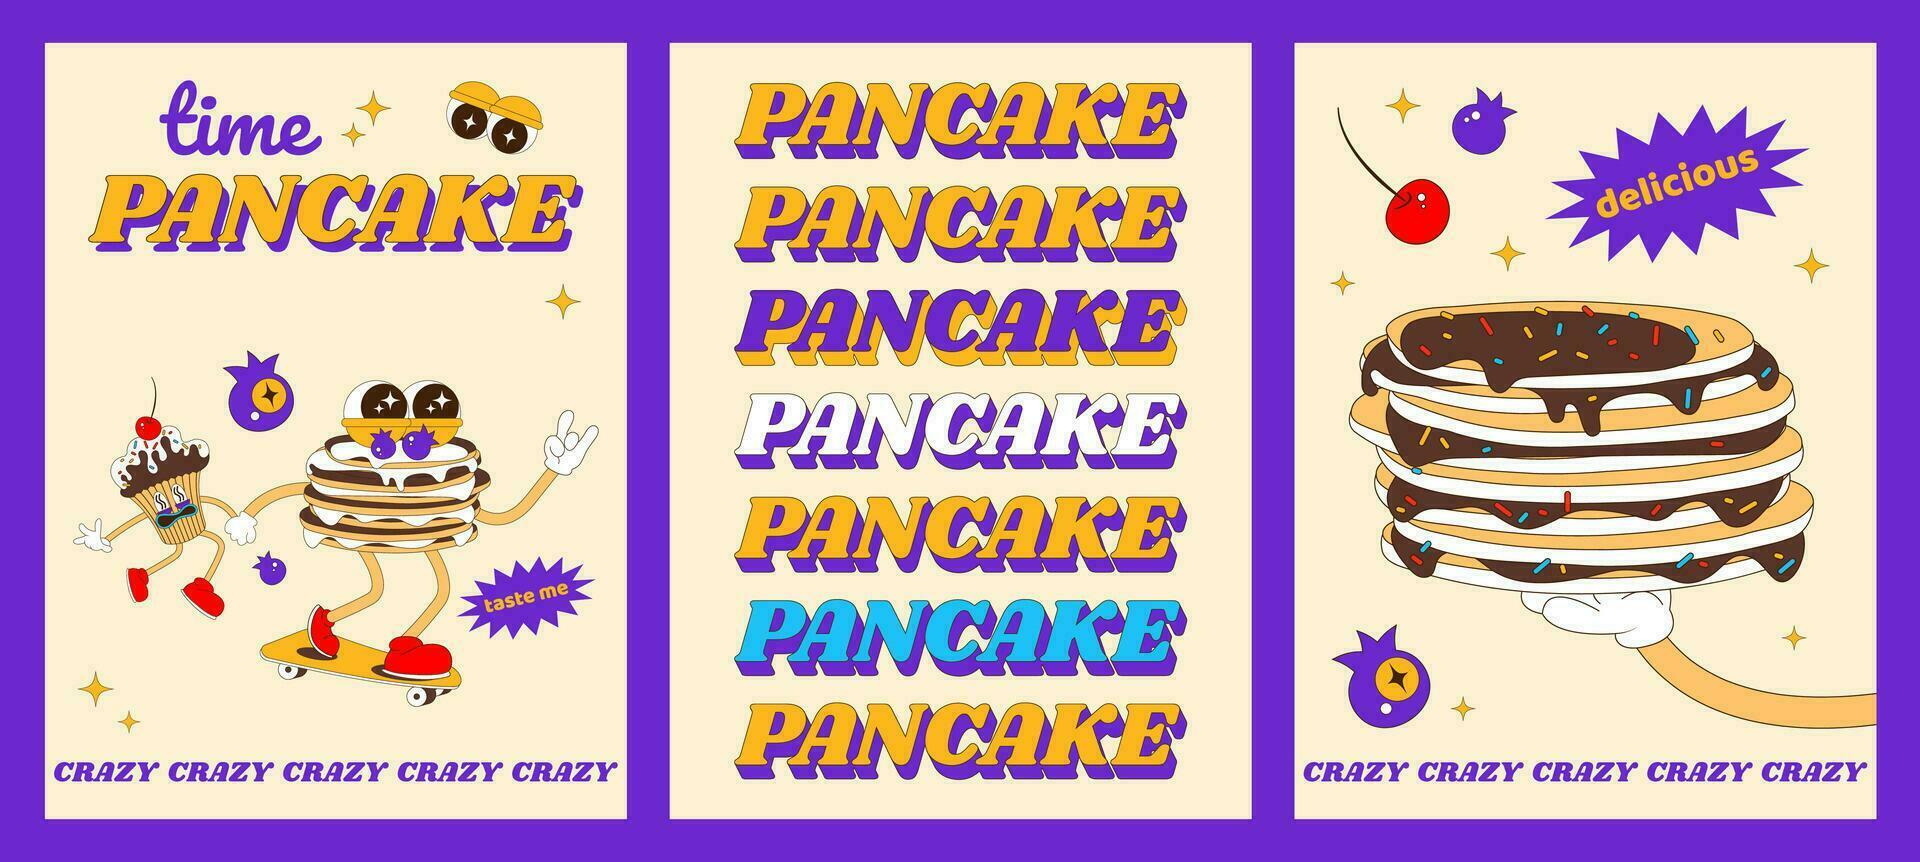 Fashion posters with funny pancake characters. Crazy pancake cake on a skateboard. Vector illustration of a poster on both sides.